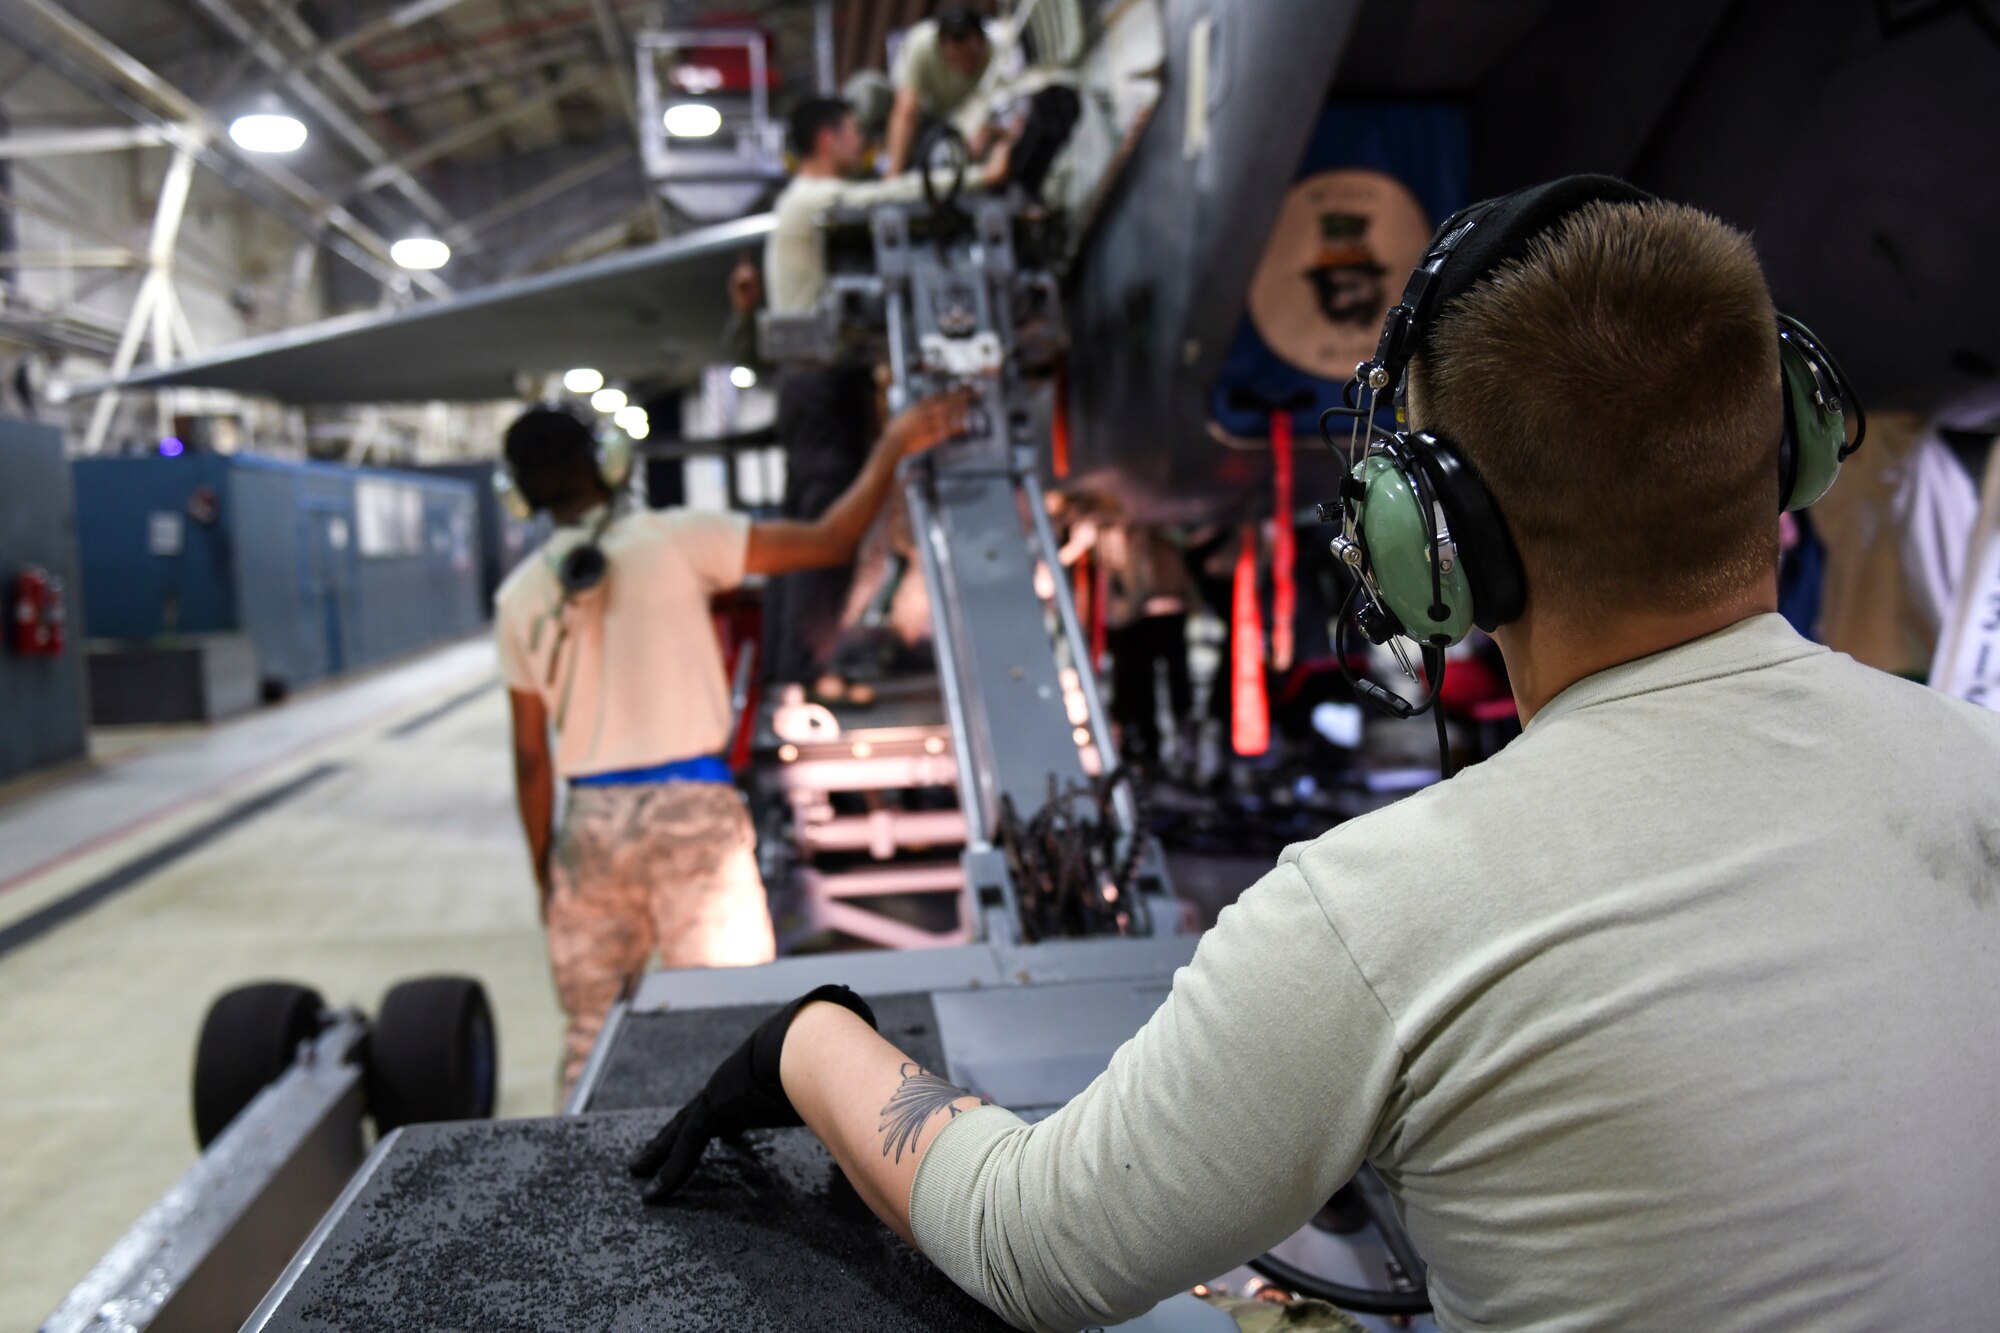 48th Maintenance Group maintainers mount a gatling gun on an F-15E Strike Eagle during a phase inspection at Royal Air Force Lakenheath, England, Jan. 10, 2019. Various parts of the F-15 are regularly inspected for discrepancies, big and small, ensuring the aircraft can perform as good as new. (U.S. Air Force photo by Senior Airman Malcolm Mayfield)